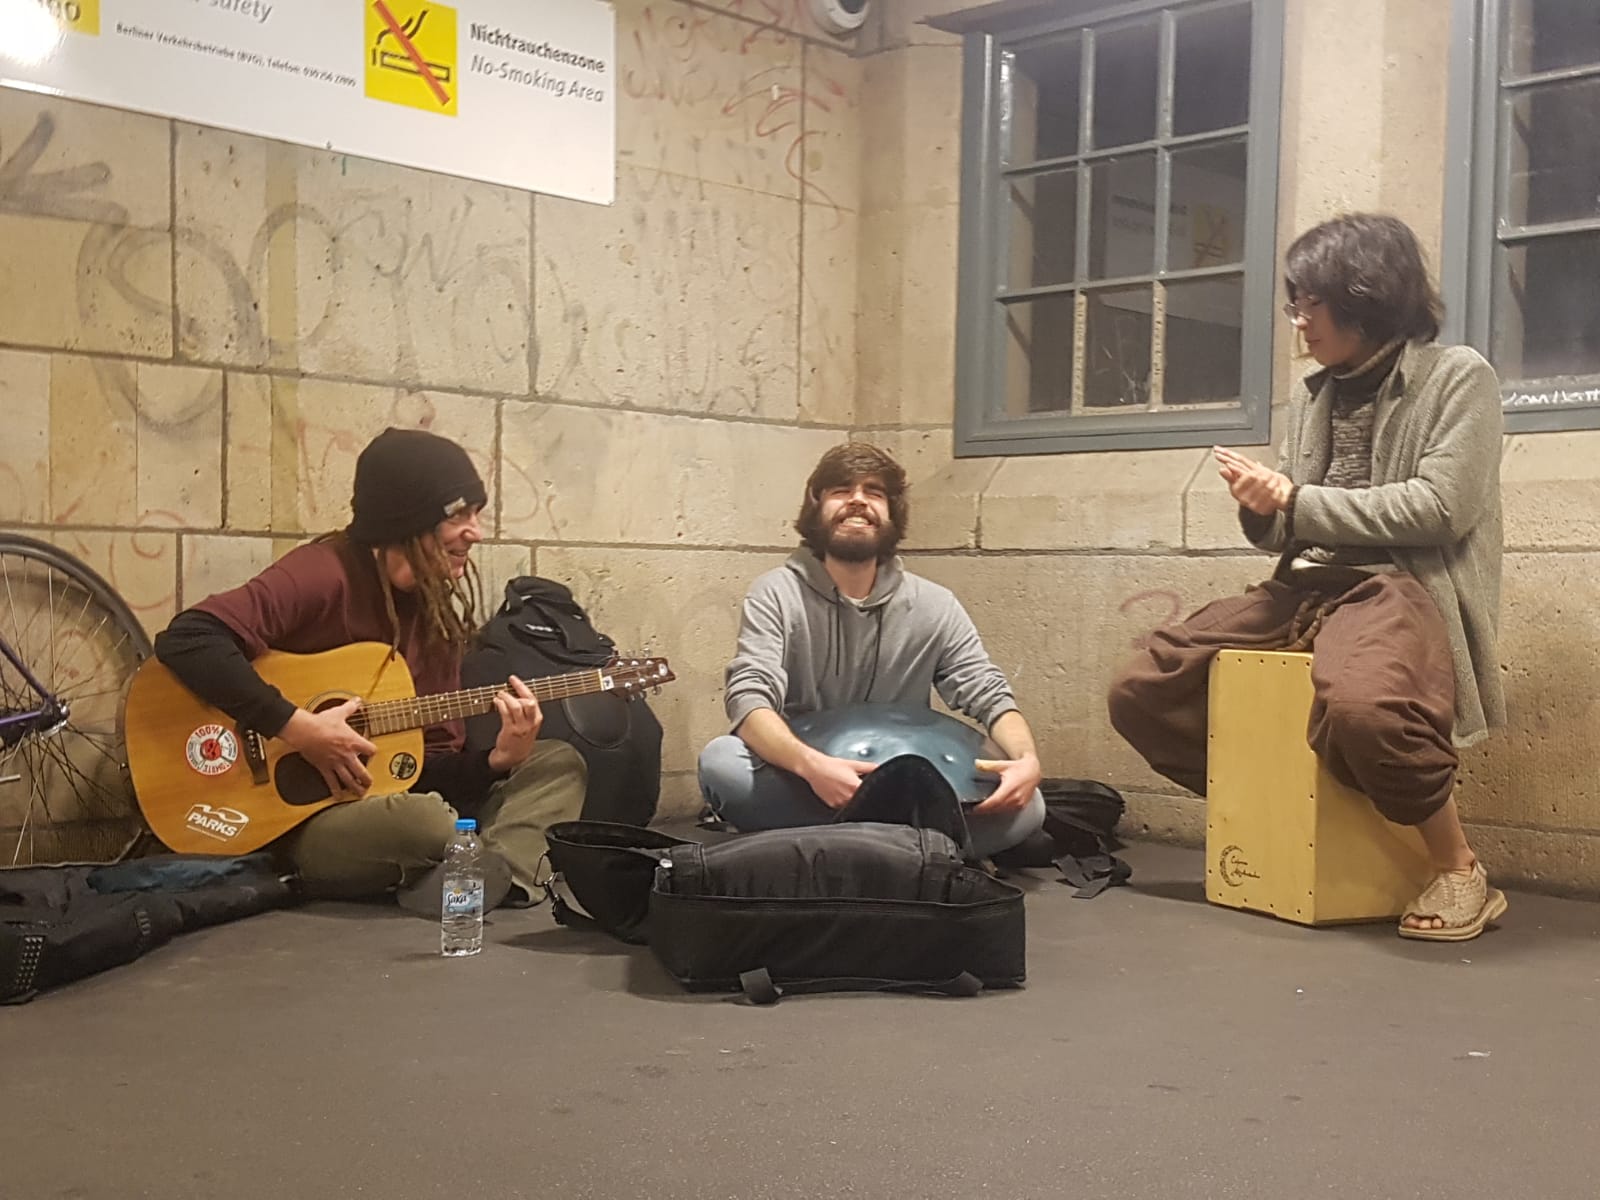 buskers in a room